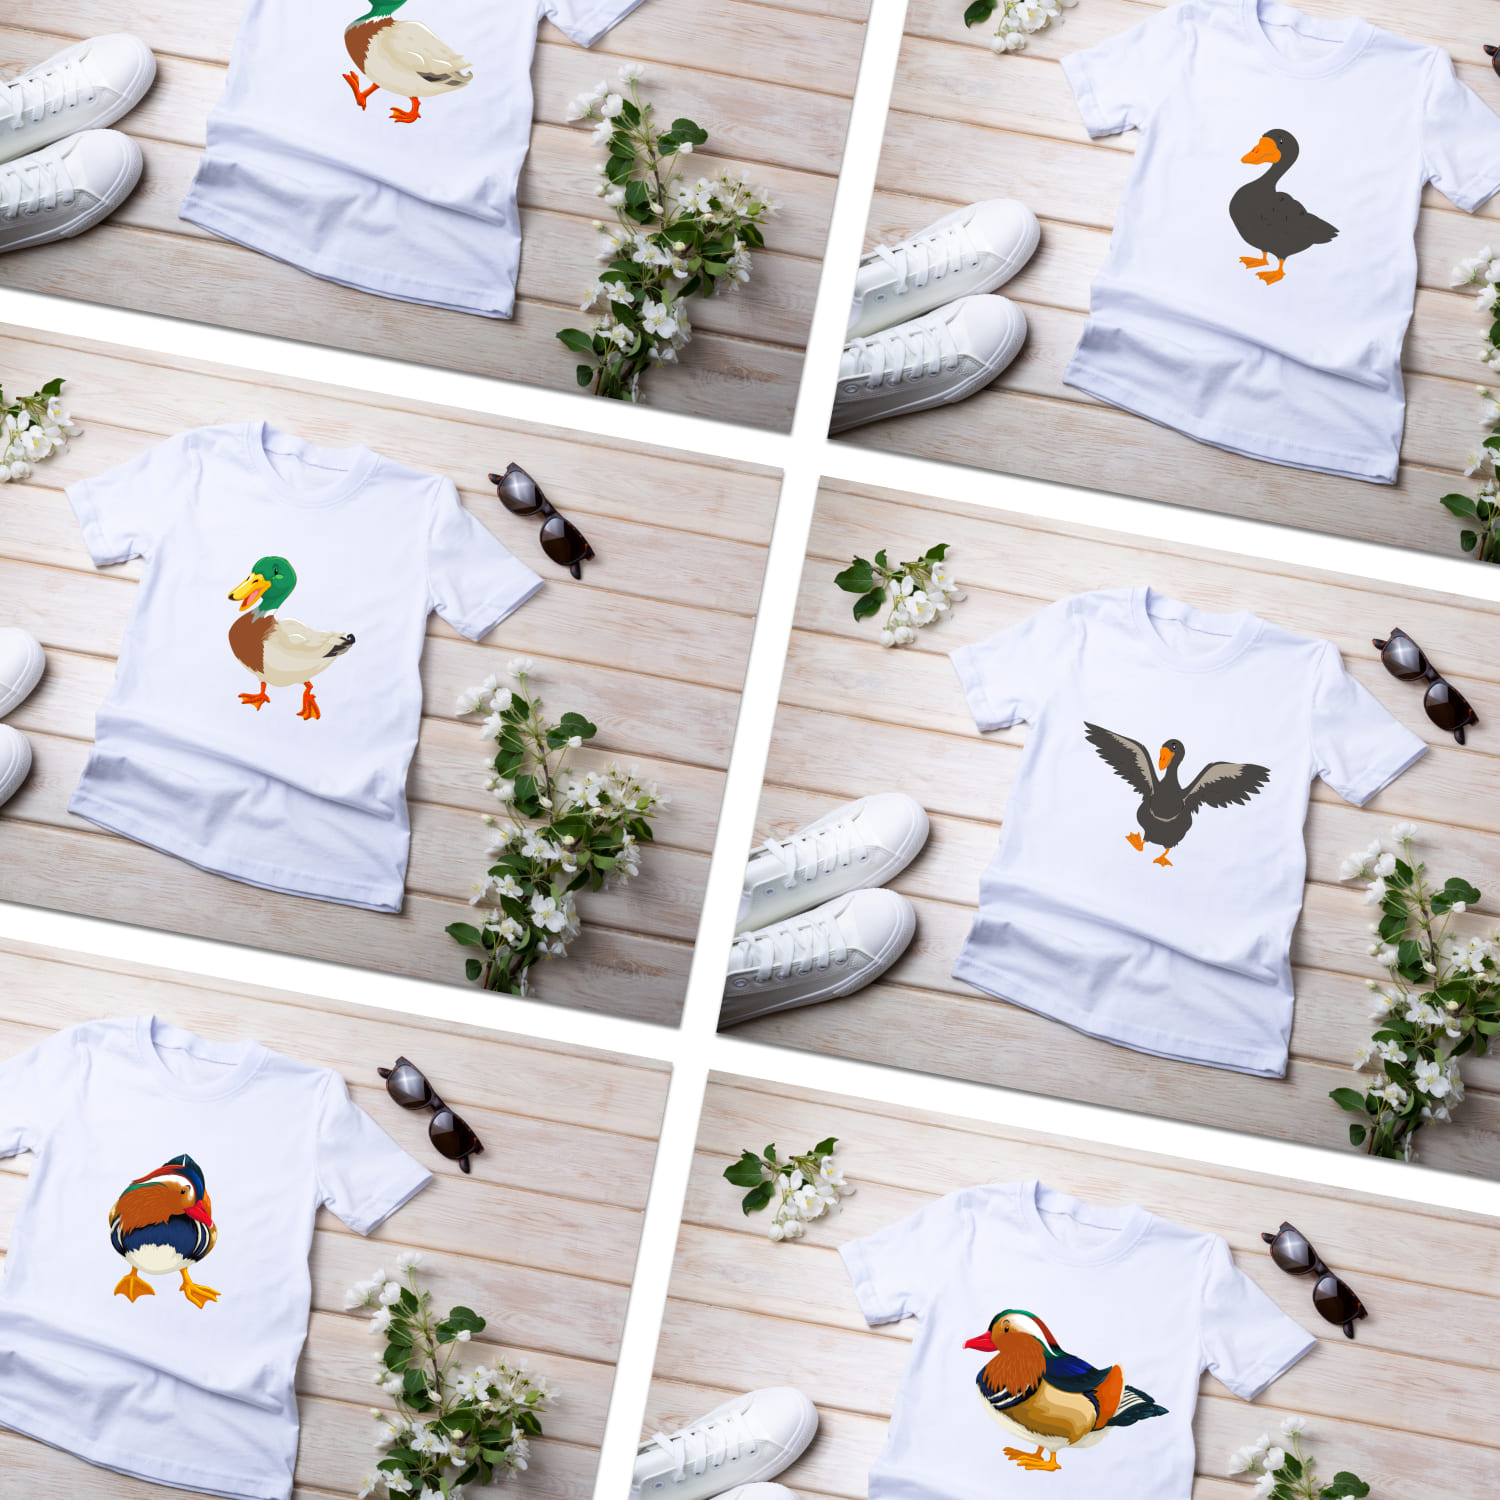 Collection of images of t-shirts with cute mallard duck prints.